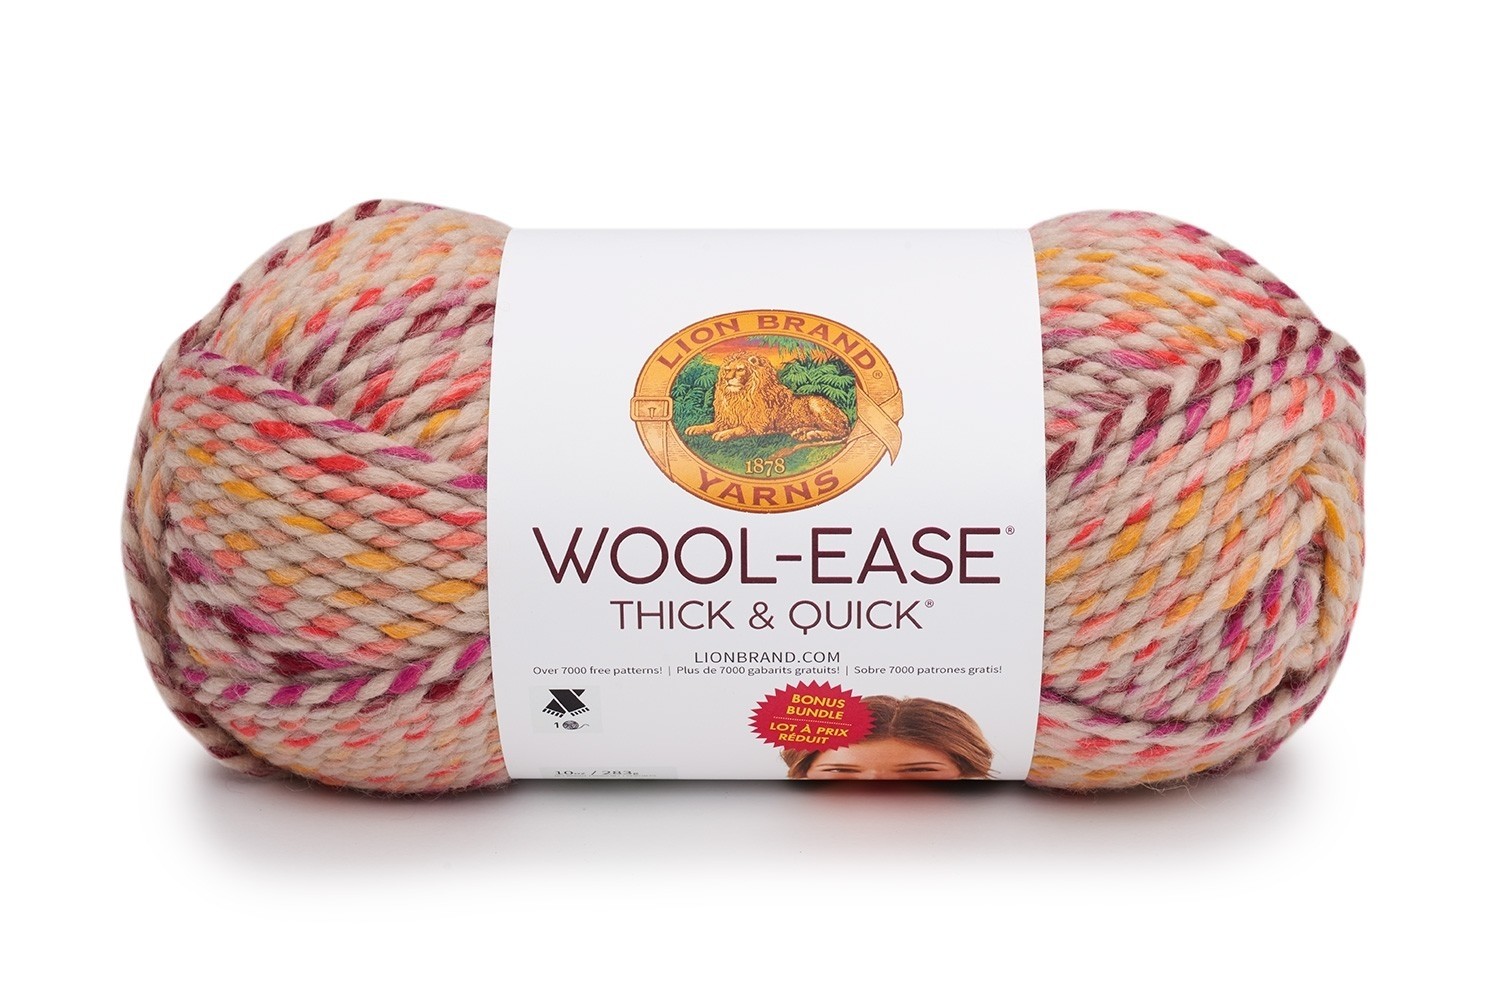 Wool-Ease Thick & Quick Spice Market